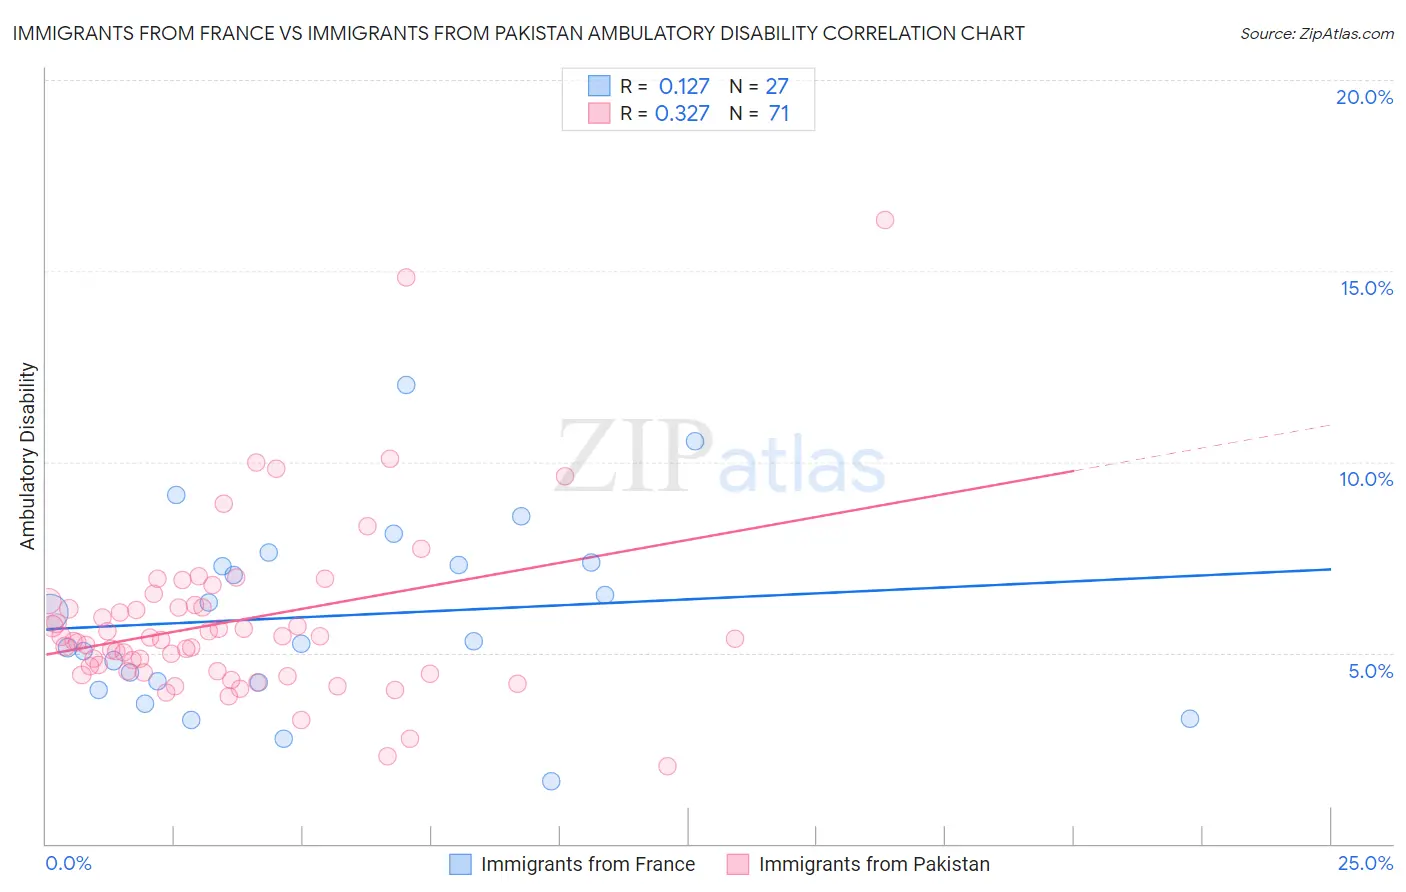 Immigrants from France vs Immigrants from Pakistan Ambulatory Disability